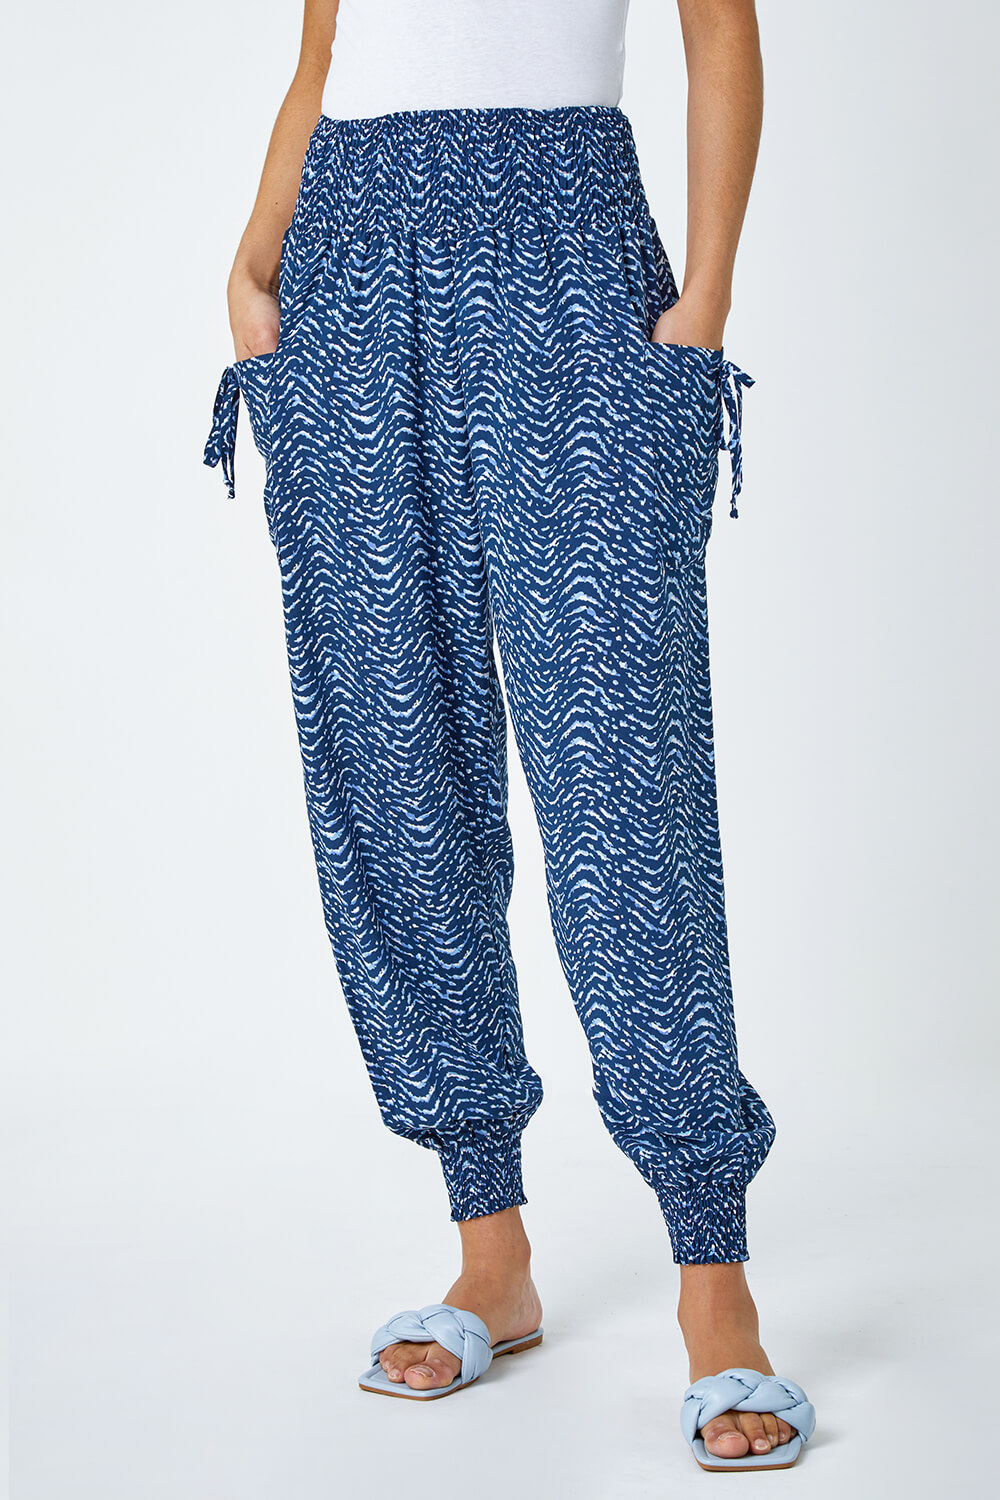 Blue Wave Print Stretch Hareem Trousers, Image 4 of 5